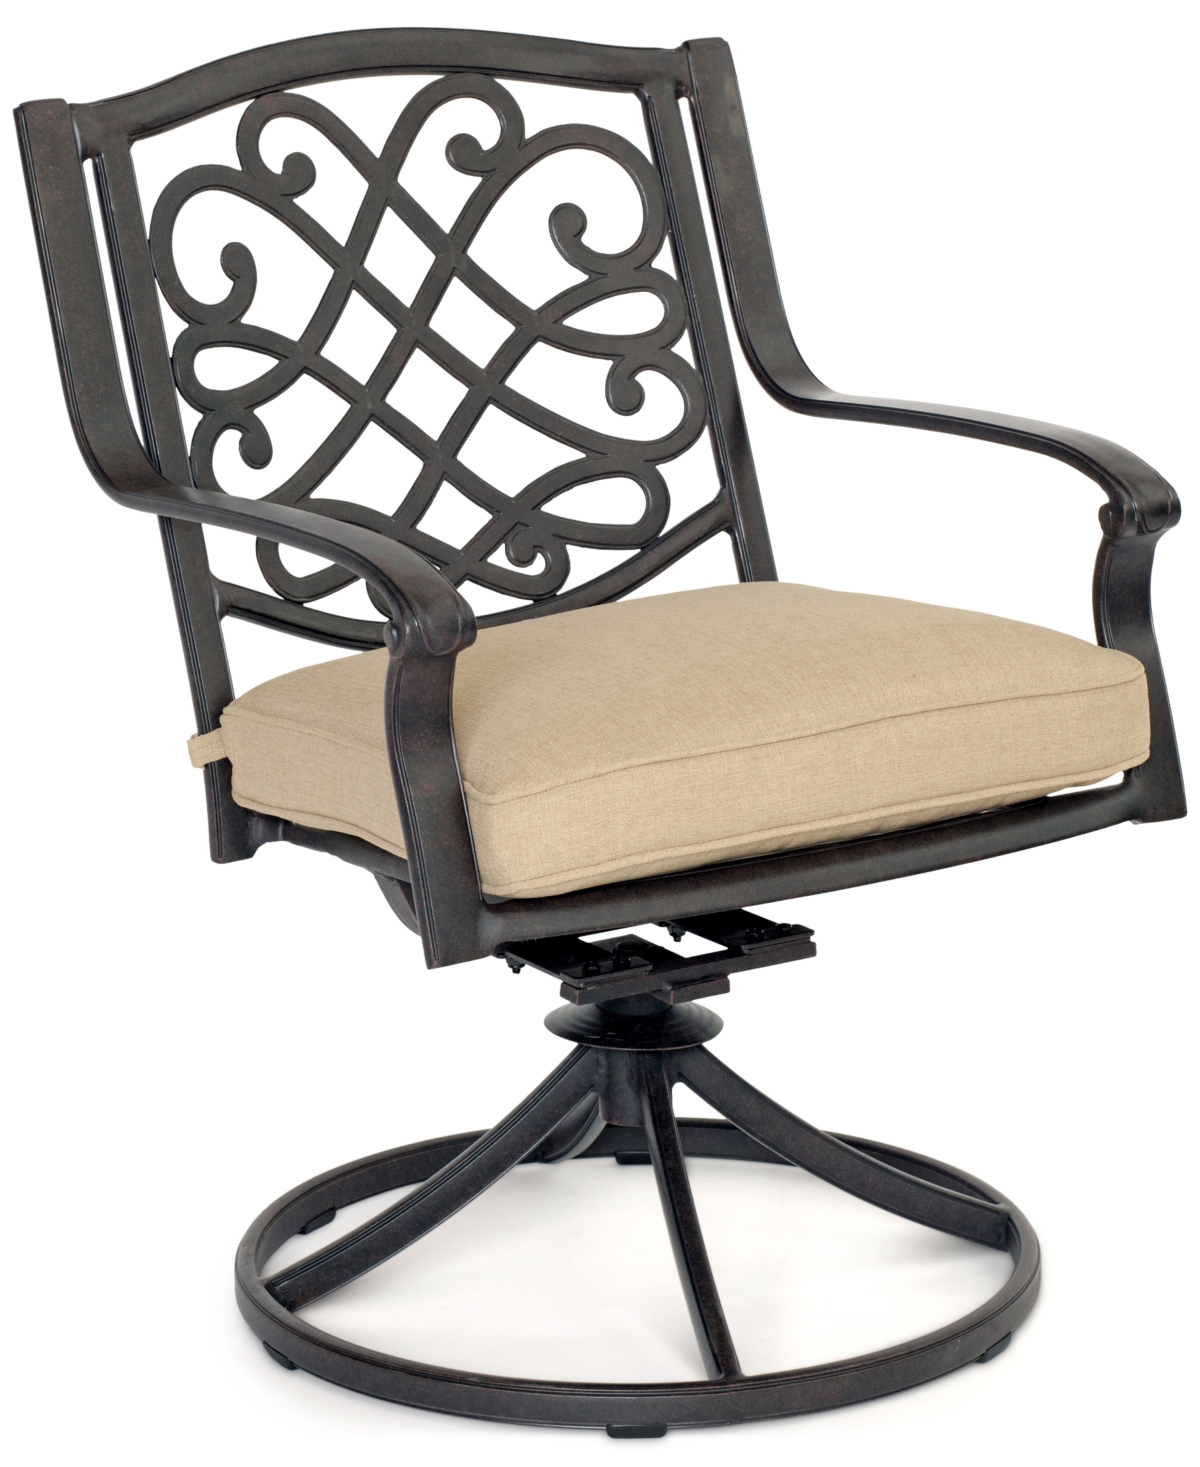 Agio Set Of 4 Park Gate Cast Aluminum Outdoor Dining Swivel Rockers, Created For Macy's